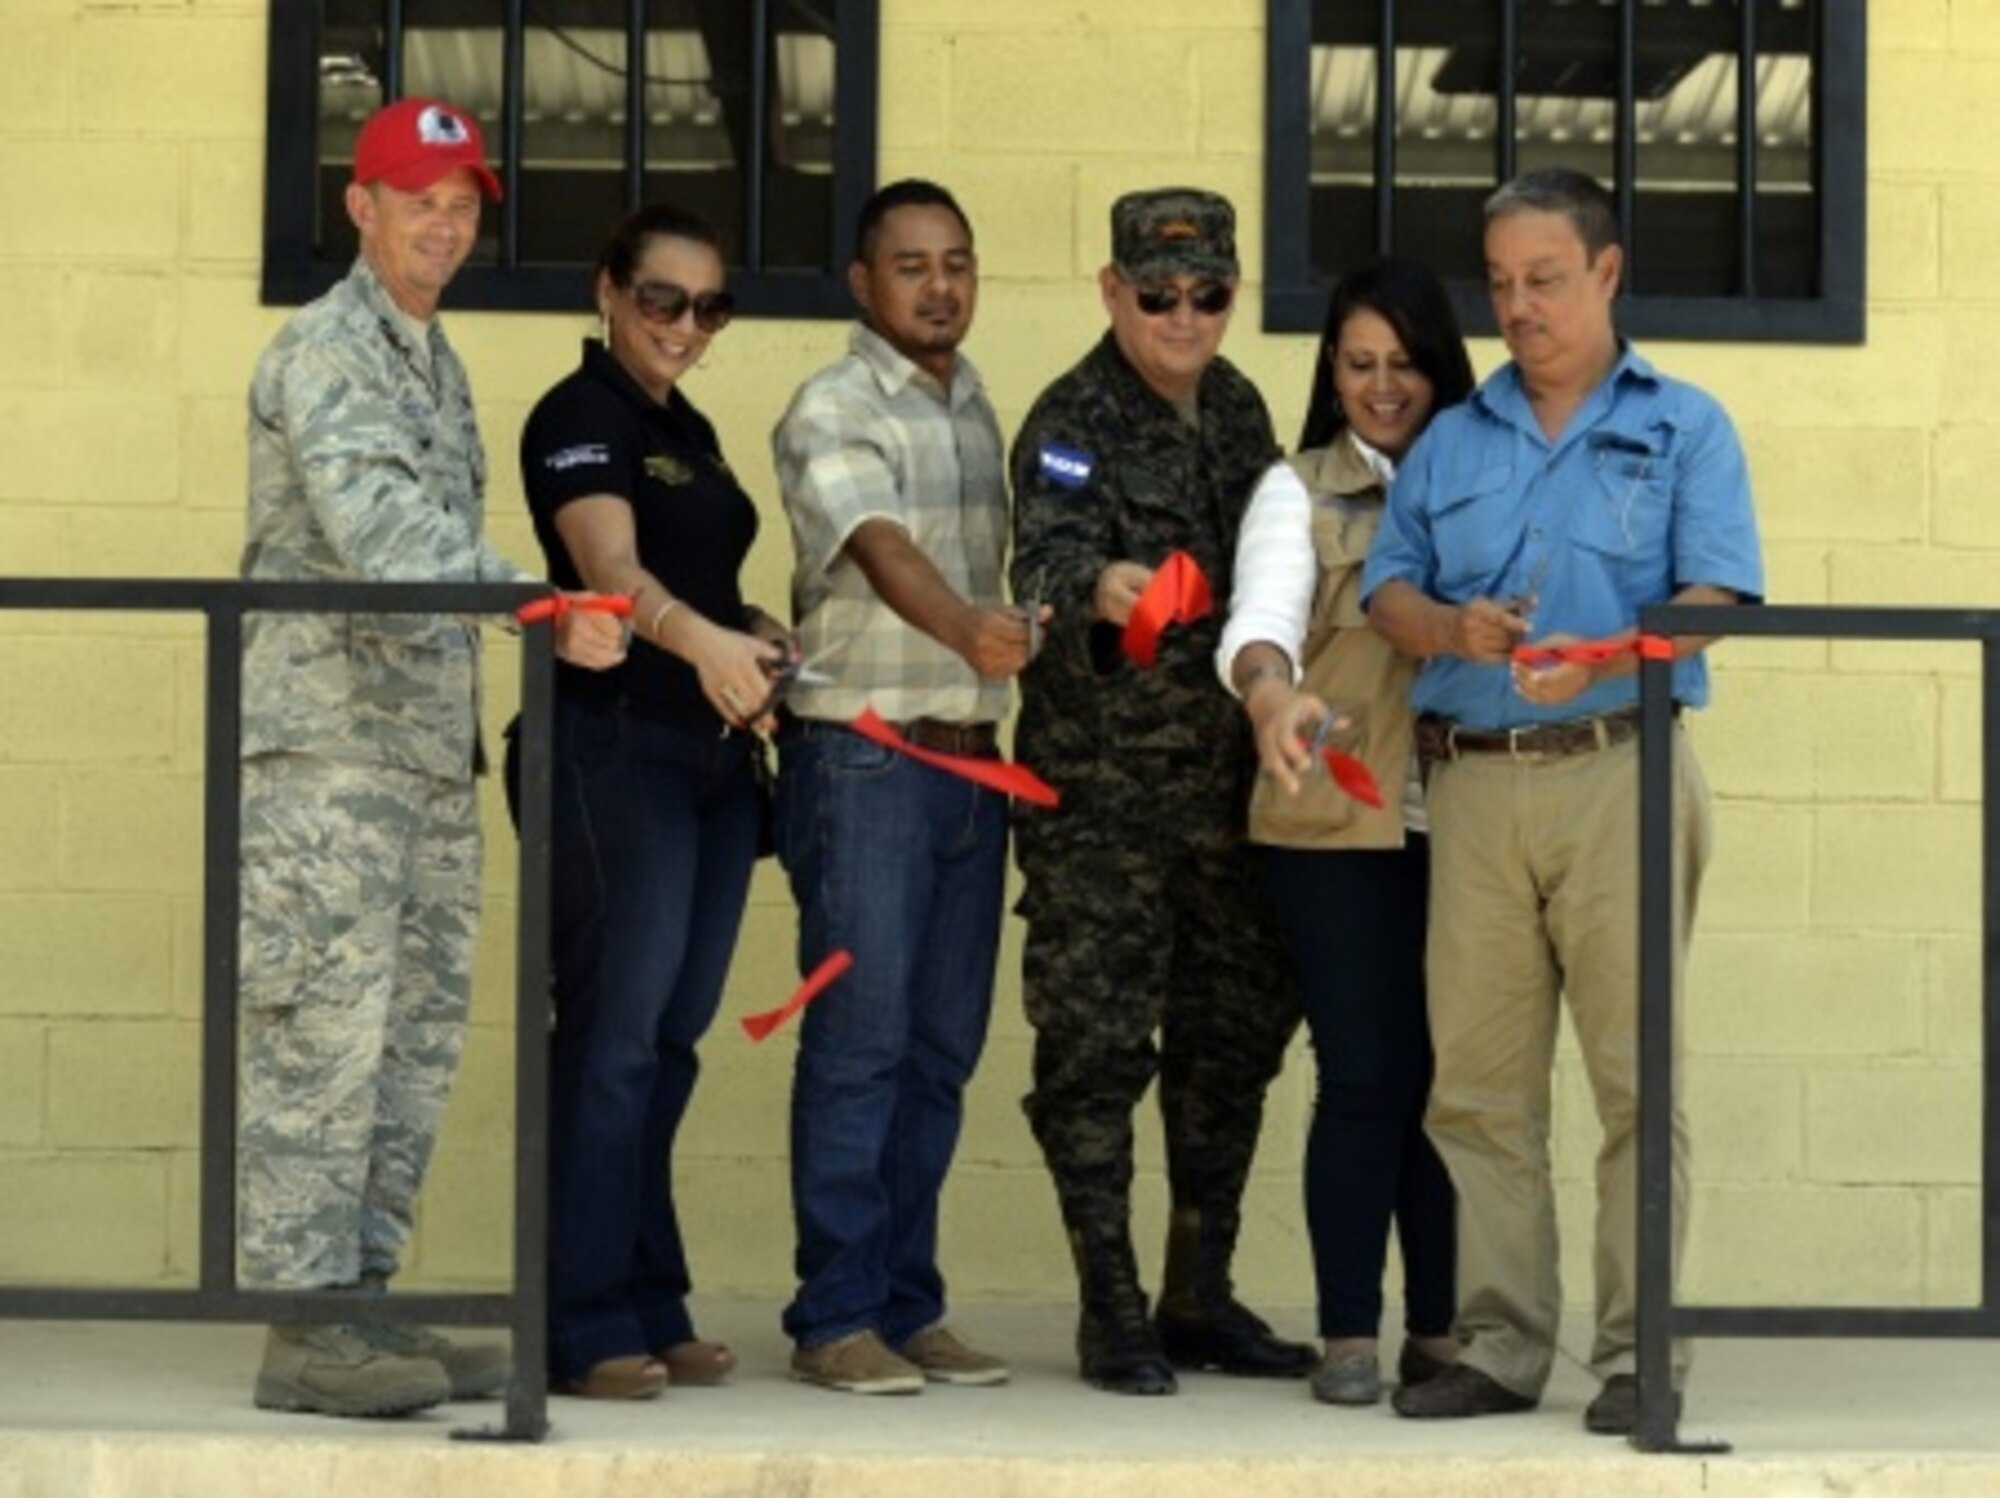 (From left to right) U.S. Air Force Lt. Col. Ryan Elliott, 823rd RED HORSE Squadron deputy commander and New Horizons Honduras exercise commander, out of Hurlburt Field, Fla., and a native of Grove City, Pa.; Director Doris Maradiaga, Colón Department of Education district director; Principal Abraham Ruiz, Gabriela Mistral school; Honduran Army Col. Rafael Deras, 15th Battalion commander: Ghisell Padilla, Colón Department governor; and Trujillo Mayor José Antonio Lainez cut the ribbon of the new two-classroom schoolhouse at the Gabriela Mistral school in Ocotes Alto, July 28, 2015, as part of the ribbon-cutting ceremony. The event marked the official opening of the building which was one of the key projects as part of the New Horizons Honduras 2015 training exercise taking place in around Trujillo, Honduras. New Horizons was launched in the 1980s and is an annual joint humanitarian assistance exercise that U.S. Southern Command conducts with a partner nation in Central America, South America or the Caribbean. The exercise improves joint training readiness of U.S. and partner nation civil engineers, medical professionals and support personnel through humanitarian assistance activities. (U.S. Air Force photo by Capt. David J. Murphy/Released)